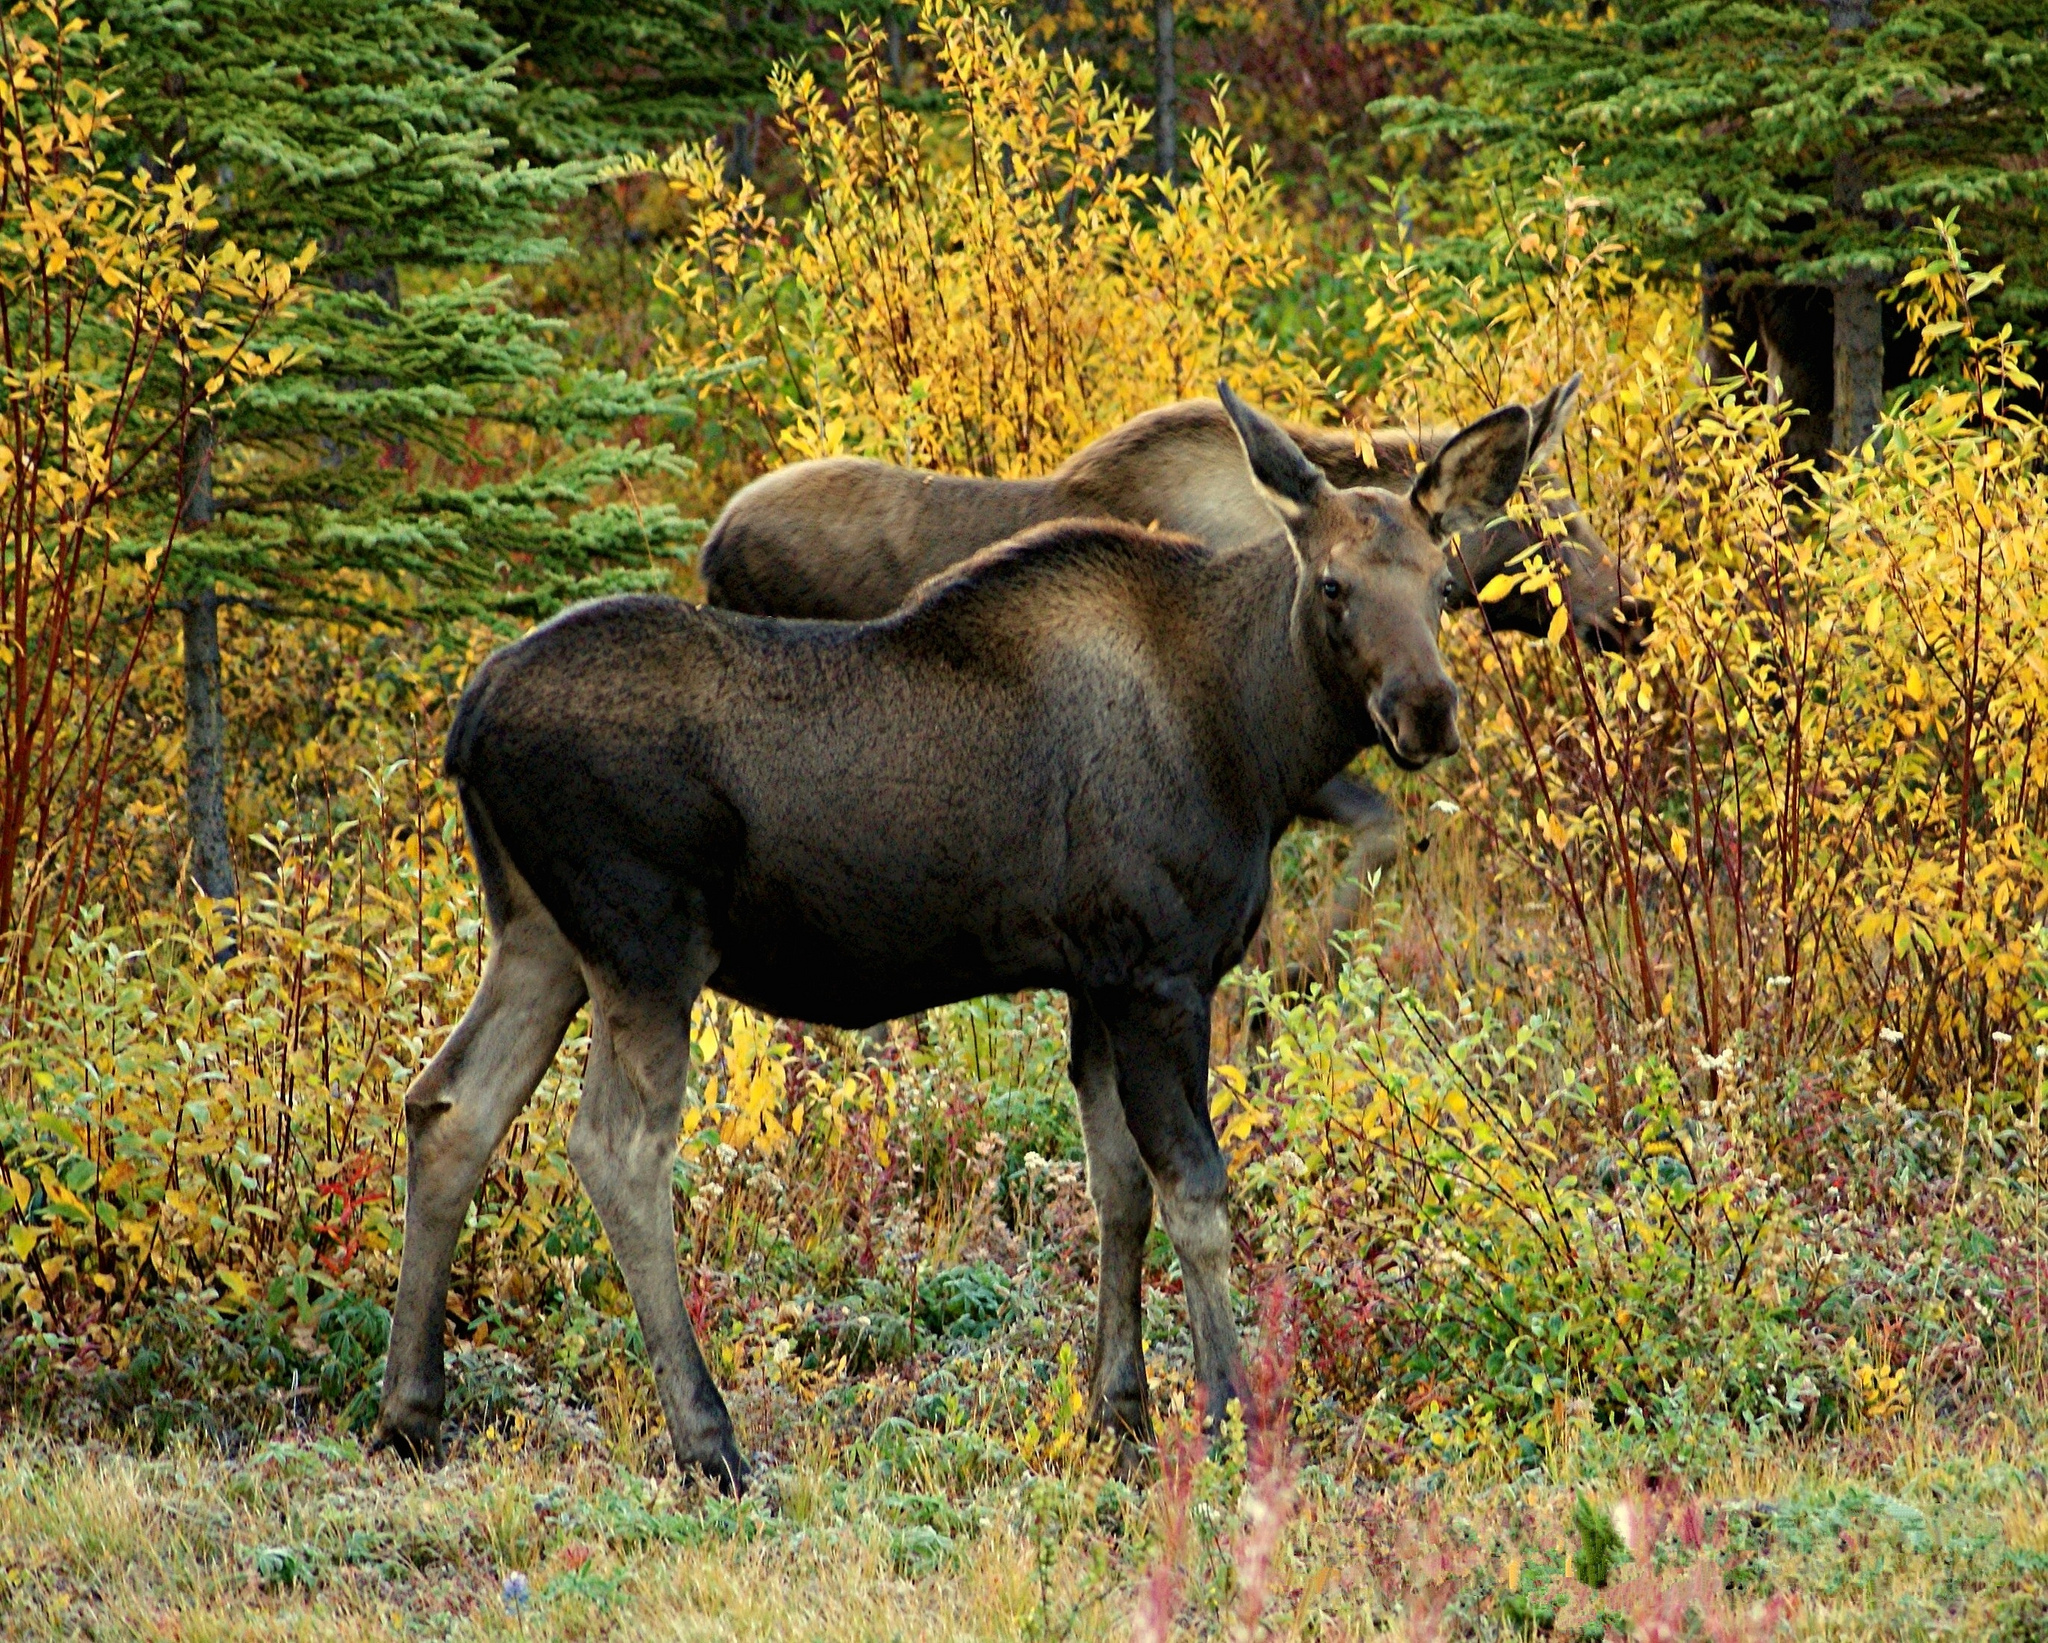 Two young moose forage in an Alaskan forest